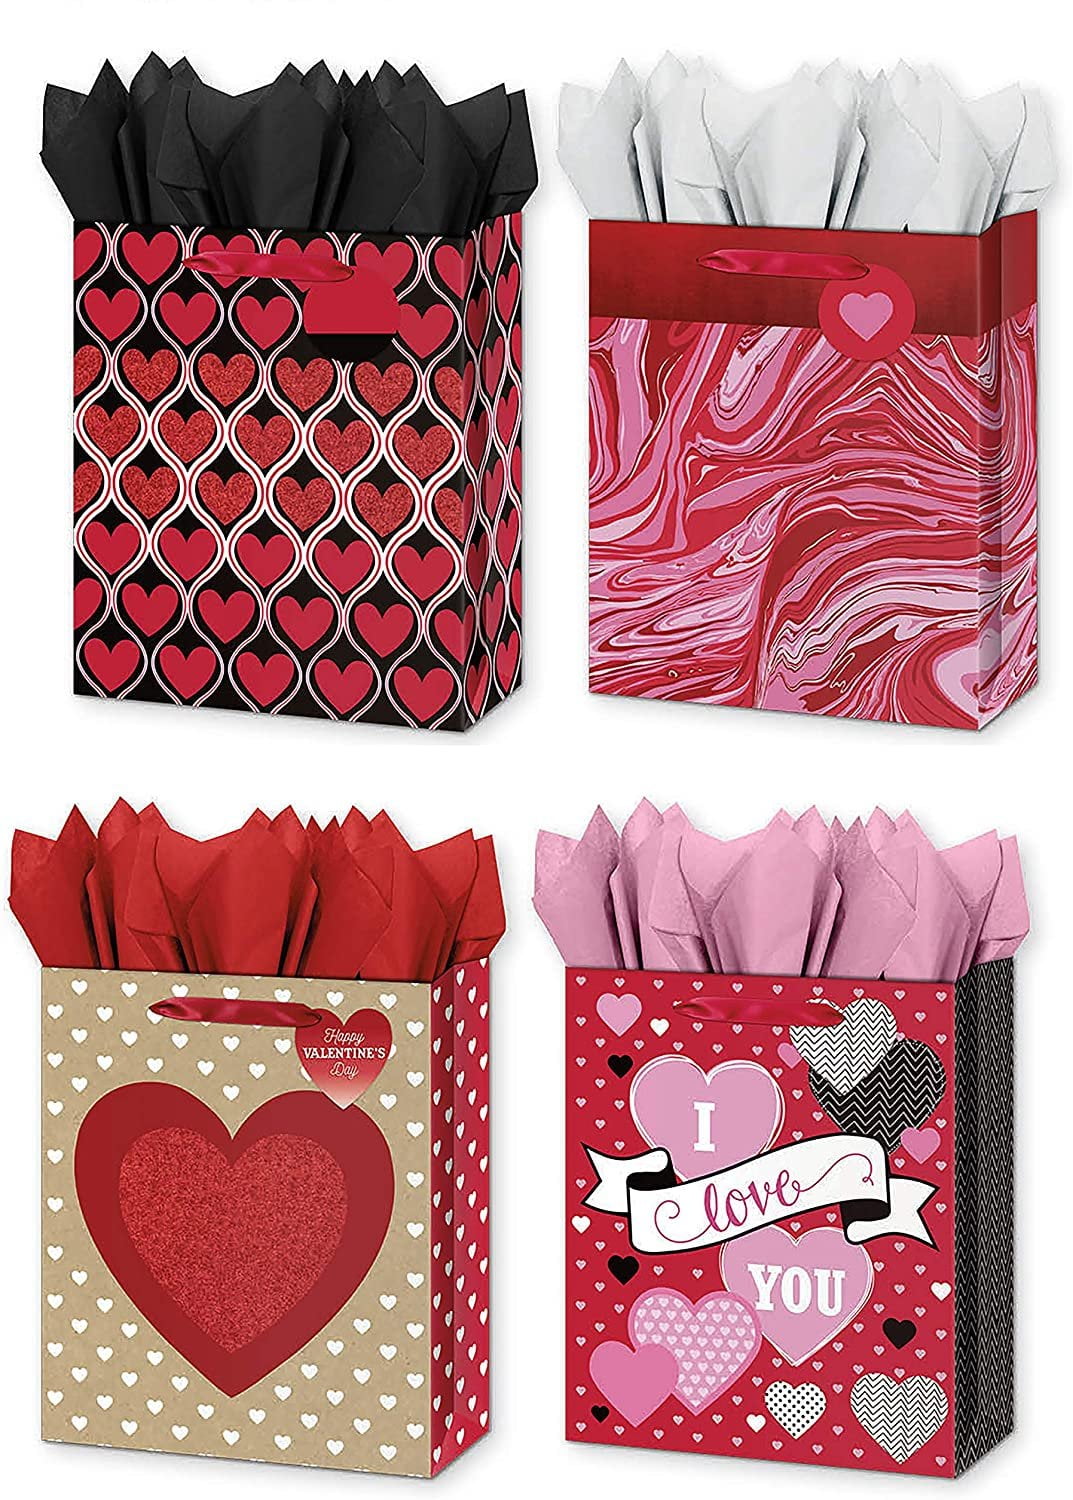 BAGS WITH TISSUE PAPER OR SHREDDING VALENTINES DAY GIFT BAG 